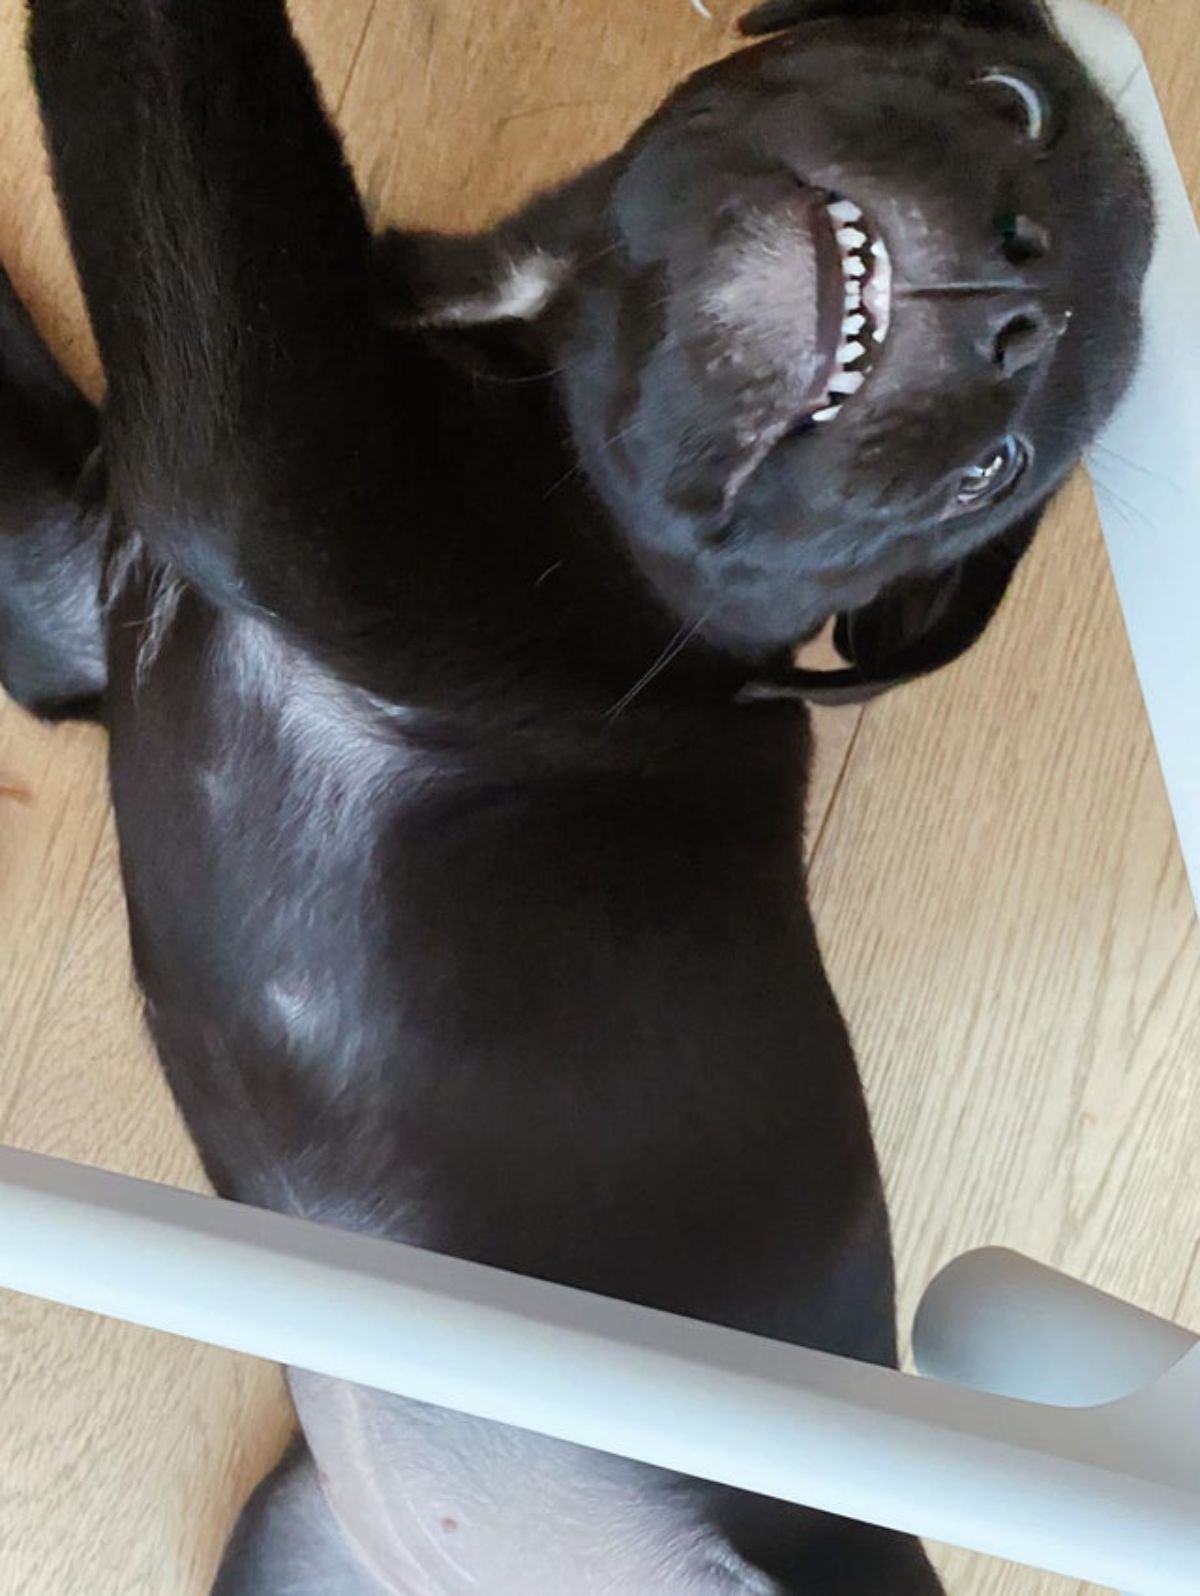 black dog laying on the floor sideways with the head against a chair leg with the dog's teeth showing in a smile